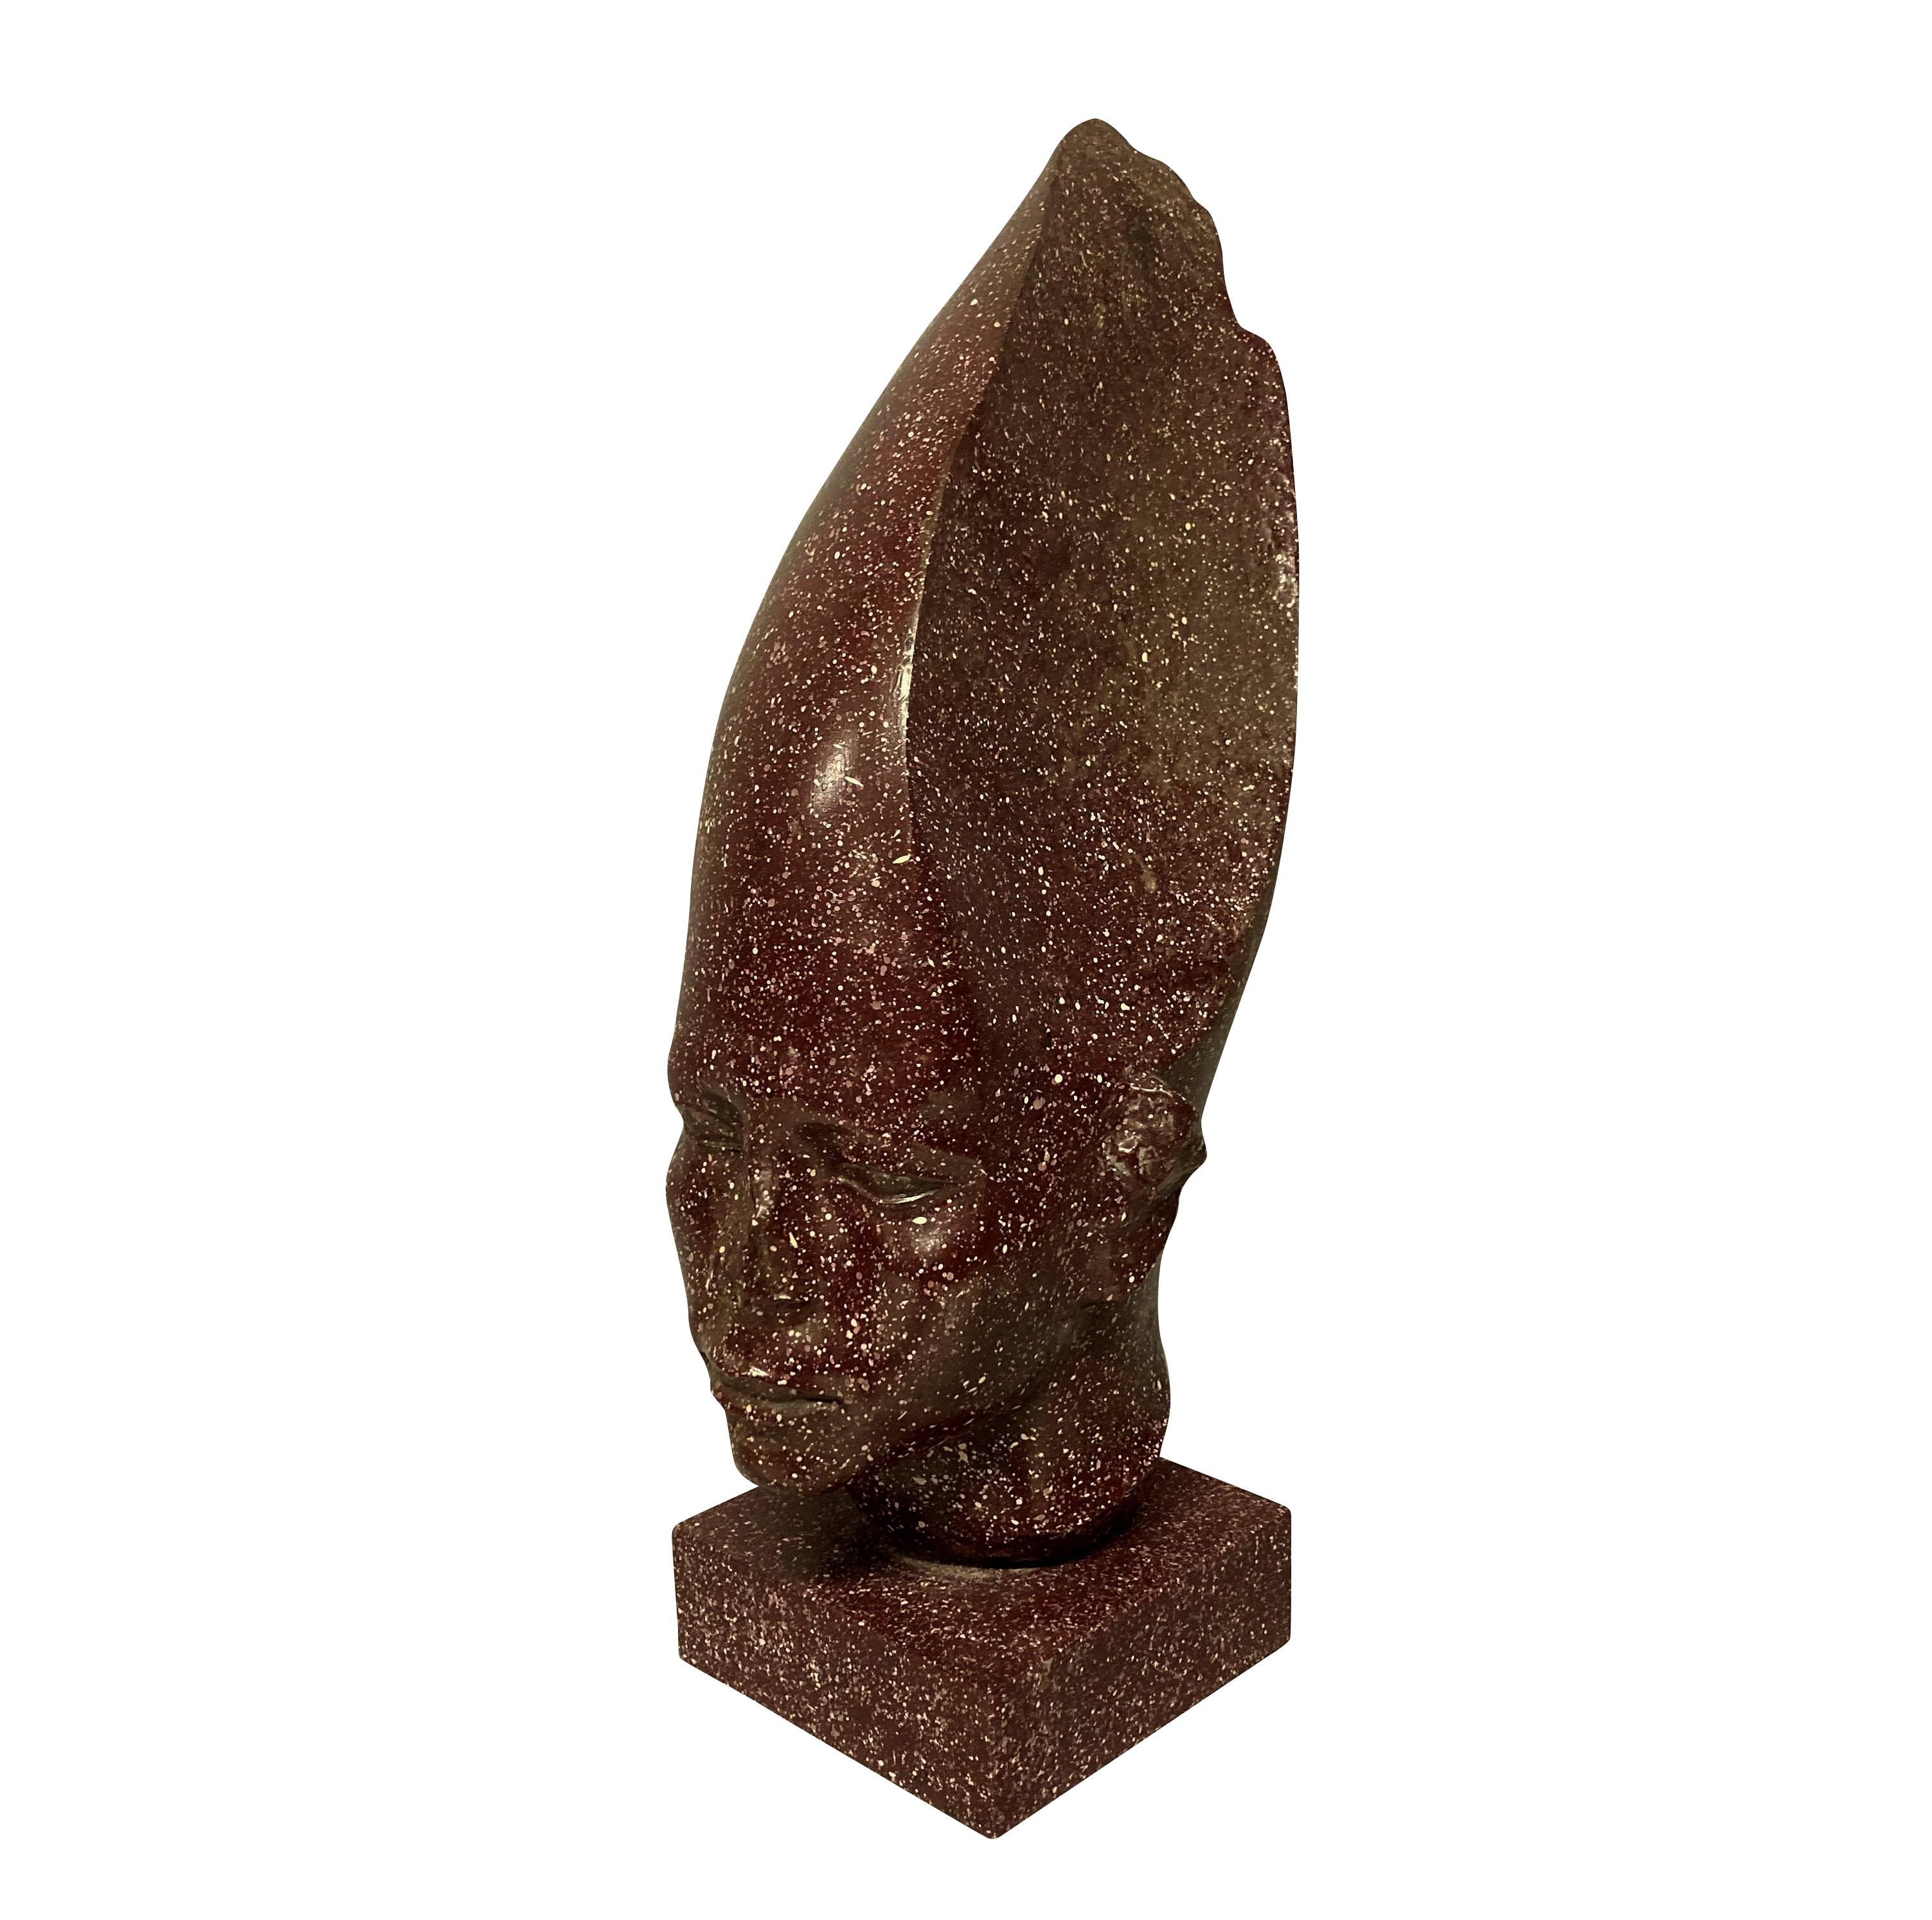 Late 20th Century Faux Porphyry Egyptian Head After the Antique